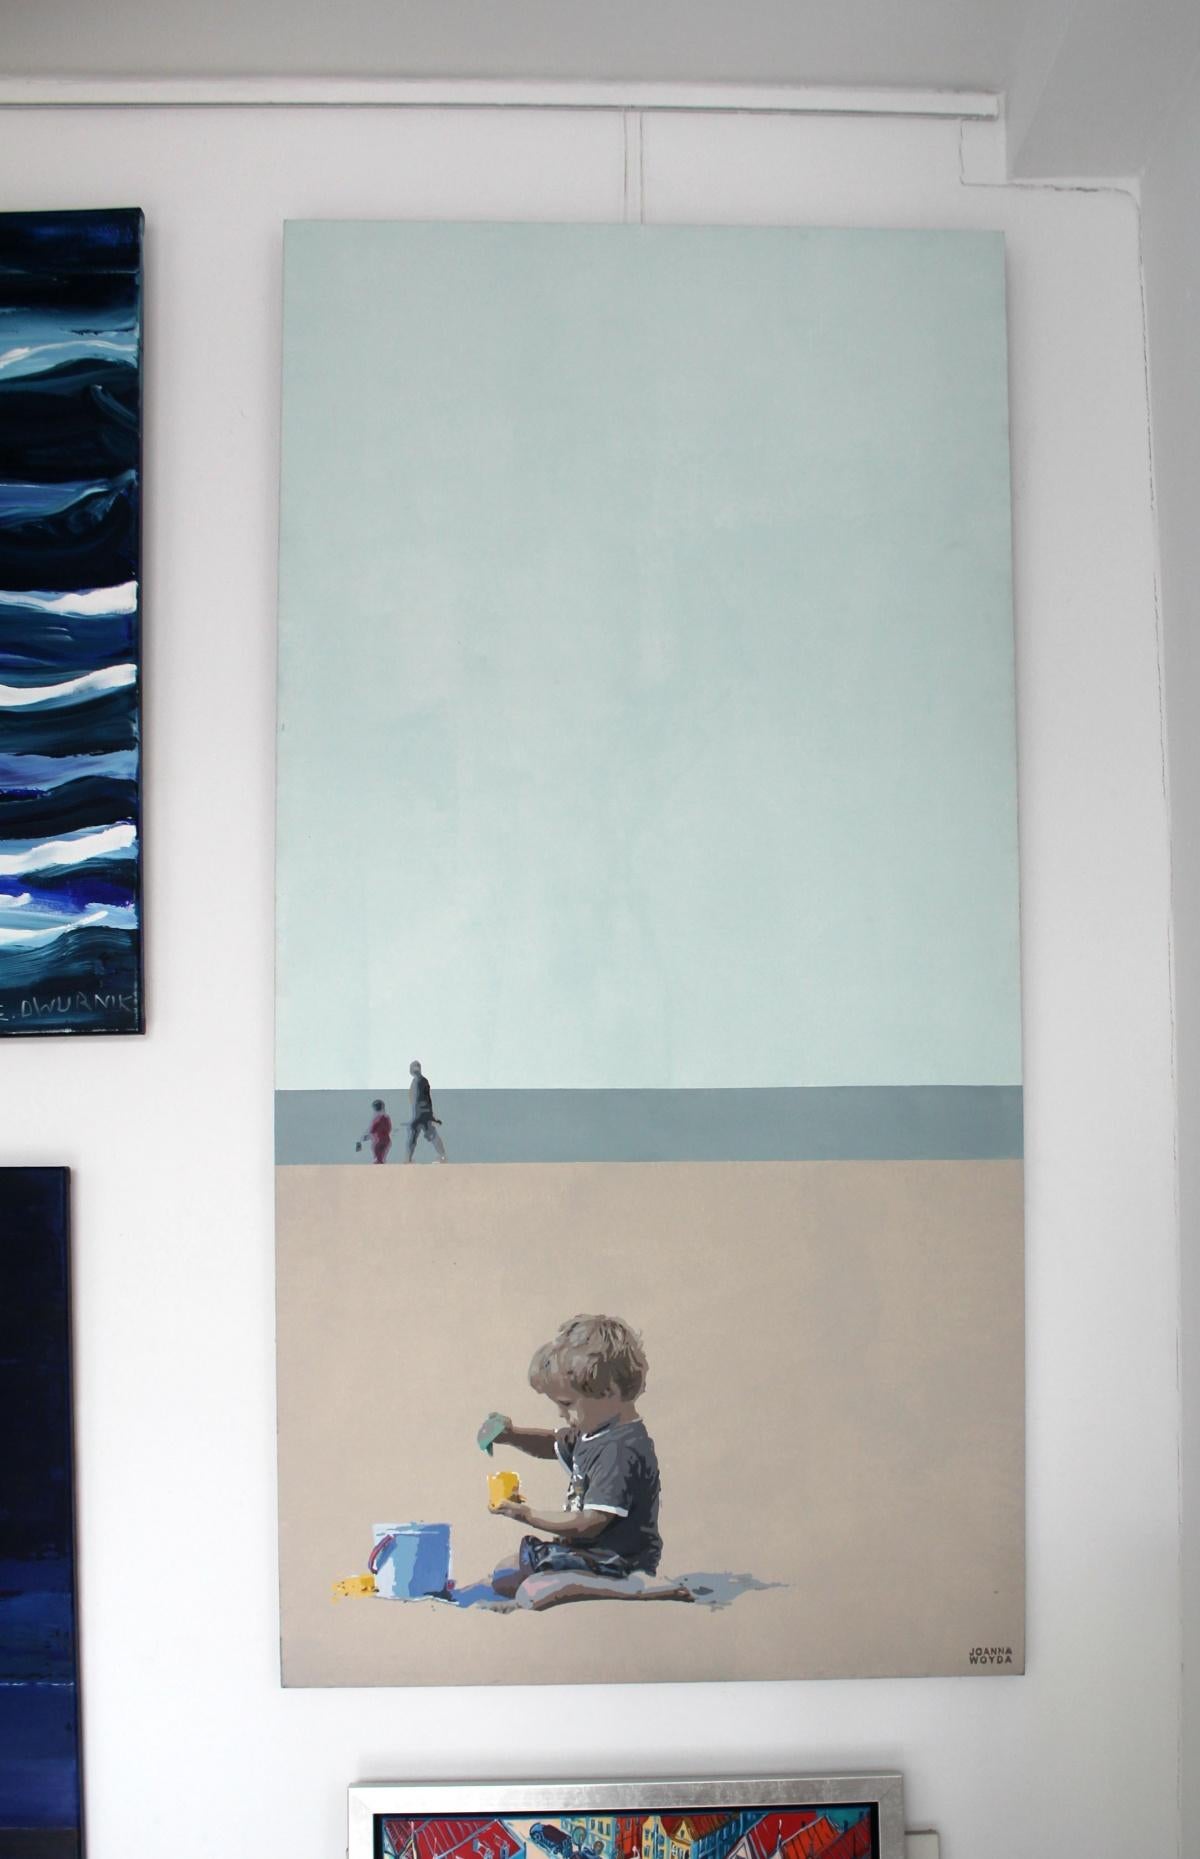 The Beach. Boy with buckets - Figurative Painting, Landscape,  Minimalism, Muted - Gray Landscape Painting by Joanna Woyda